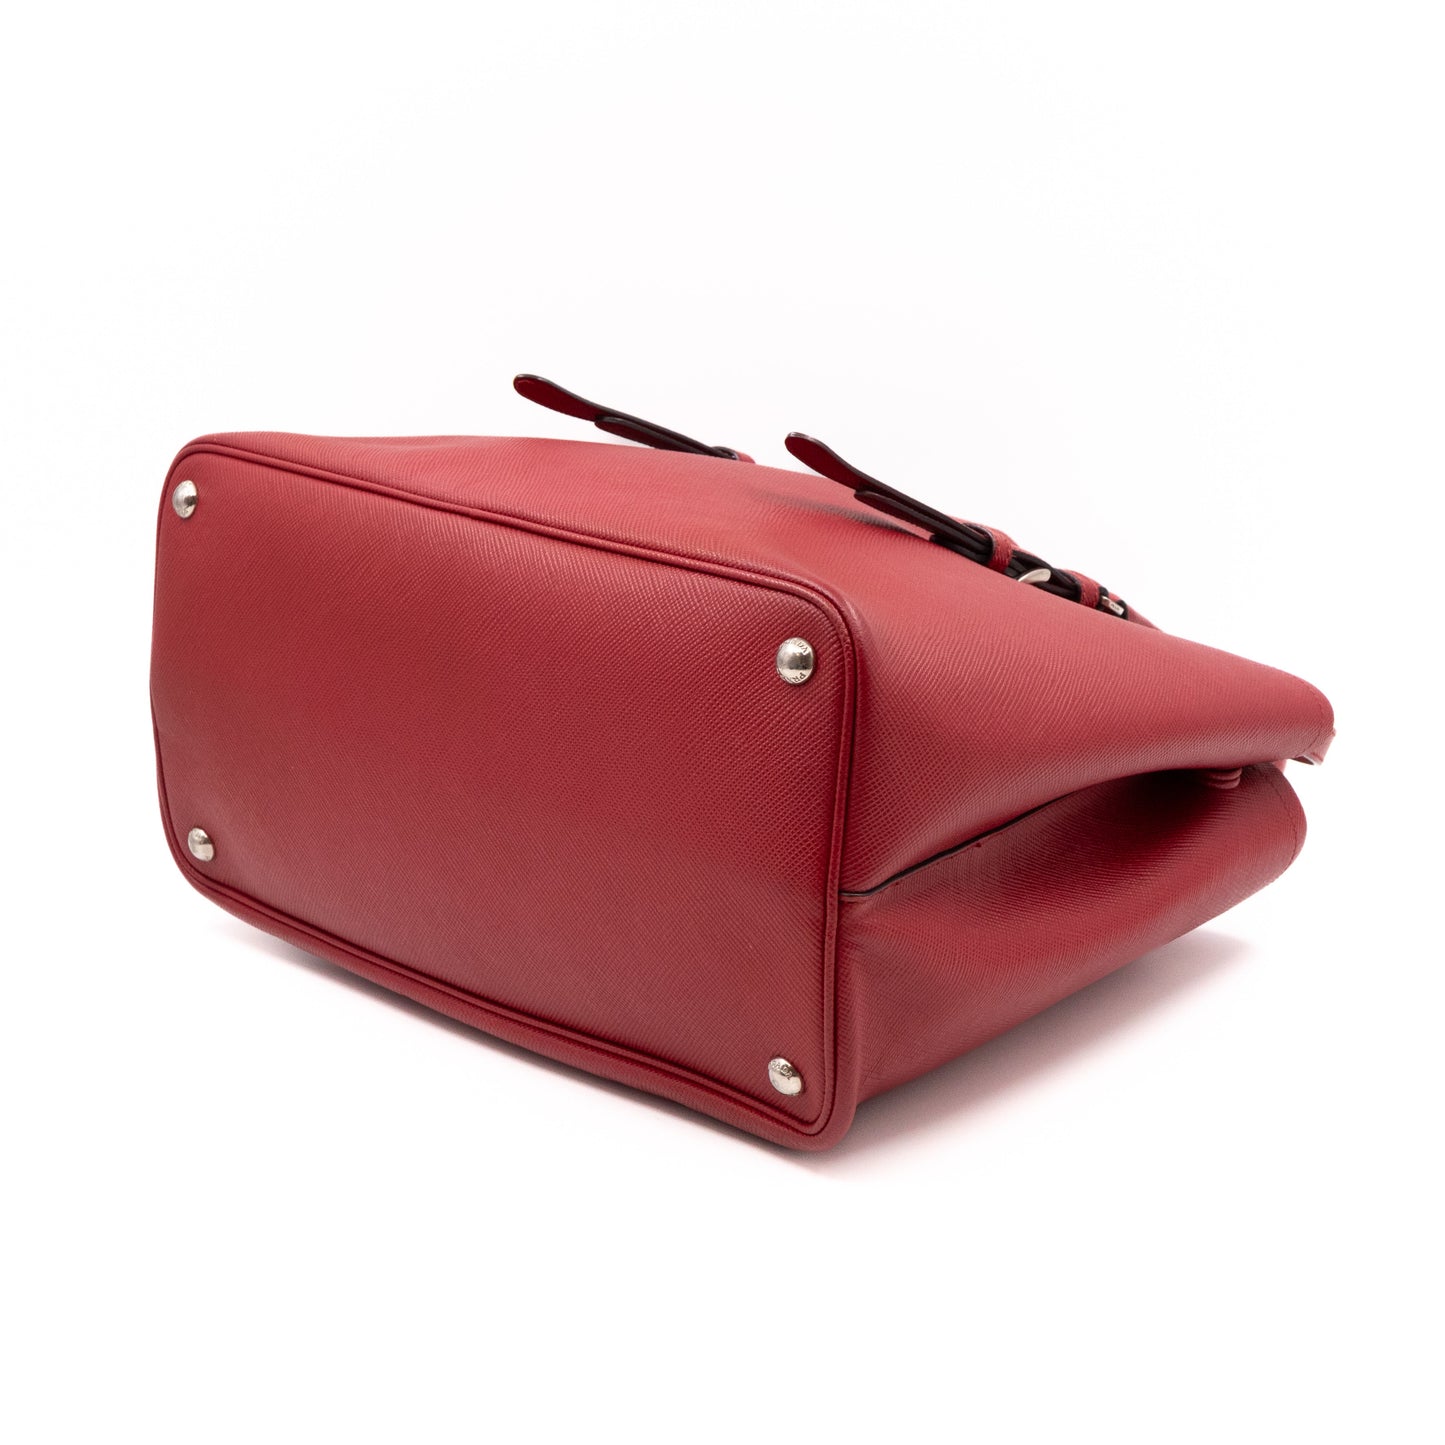 Double Bag Large Red Saffiano Leather